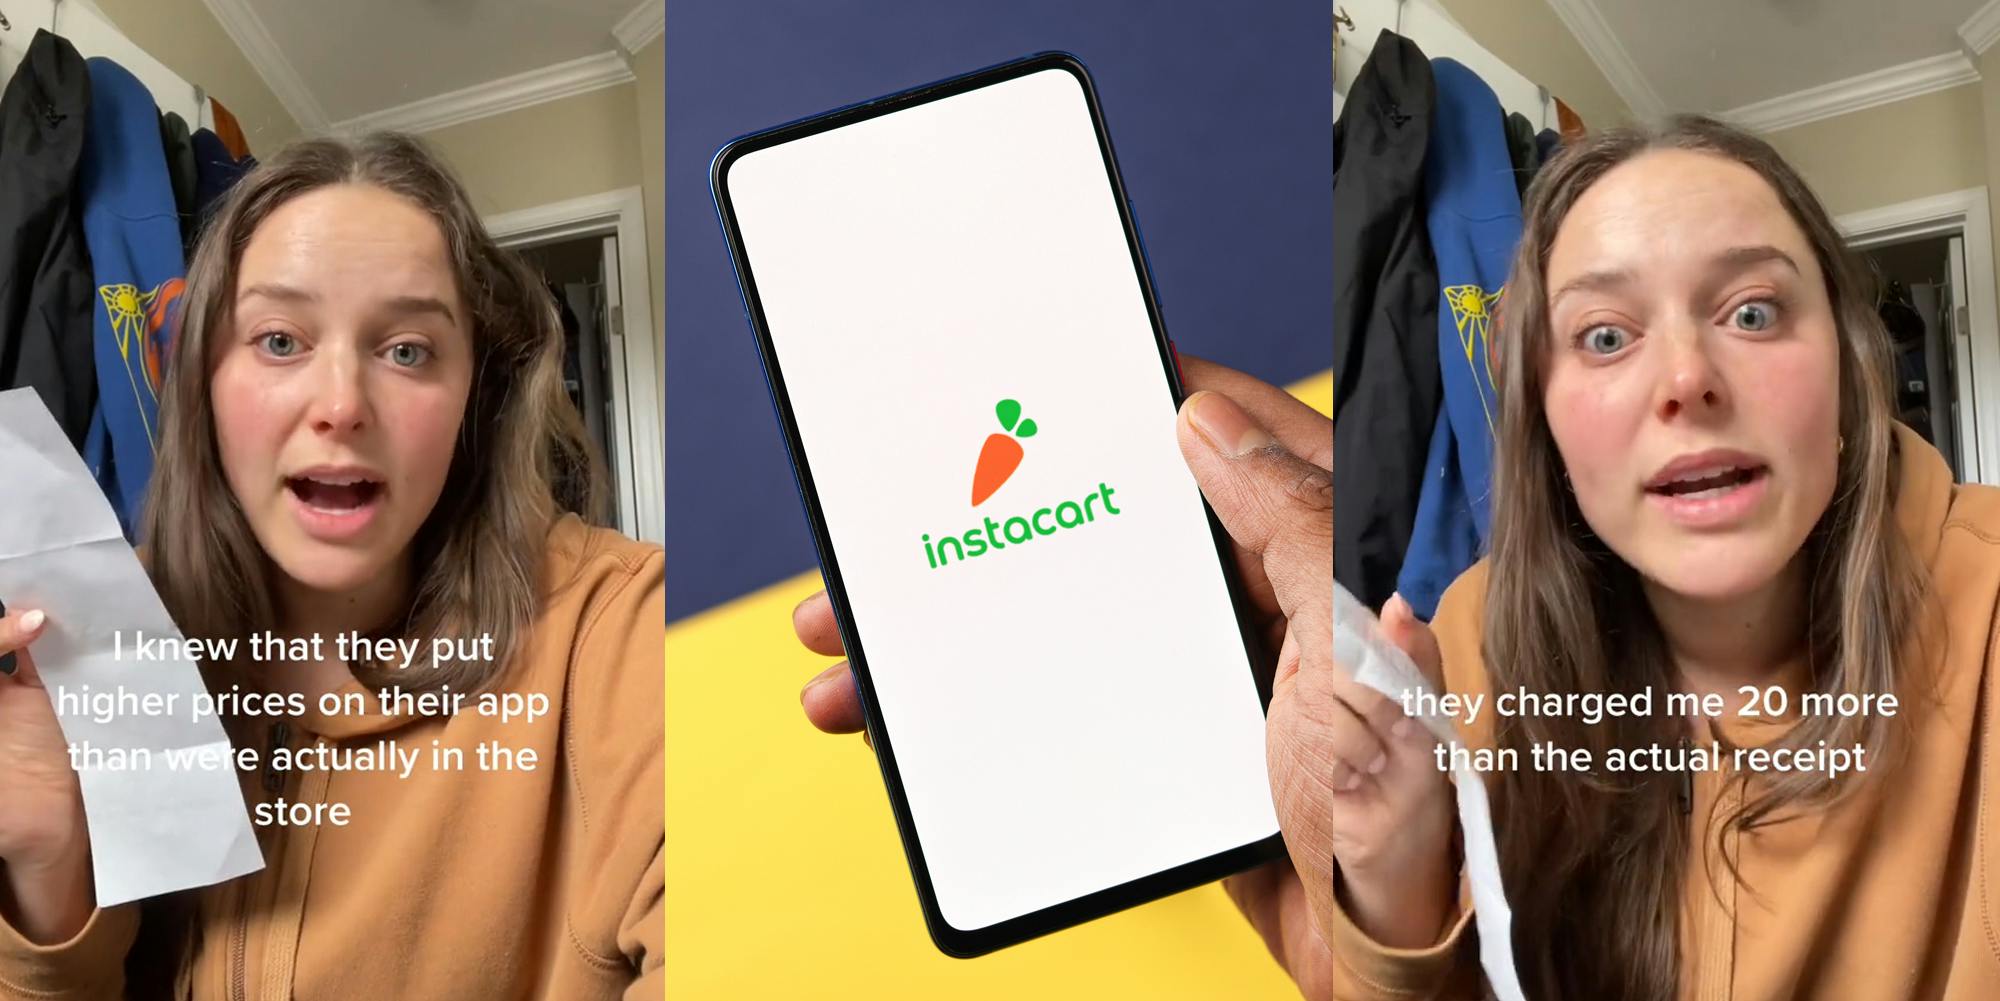 Instacart customer speaking holding receipt with caption " I knew they put higher prices on their app than were actually in the store" (l) Hand holding phone with Instacart on screen in front of purple and yellow diagonal split background (c) Instacart customer speaking holding receipt with caption " they charged me 20 more than the actual receipt " (r)